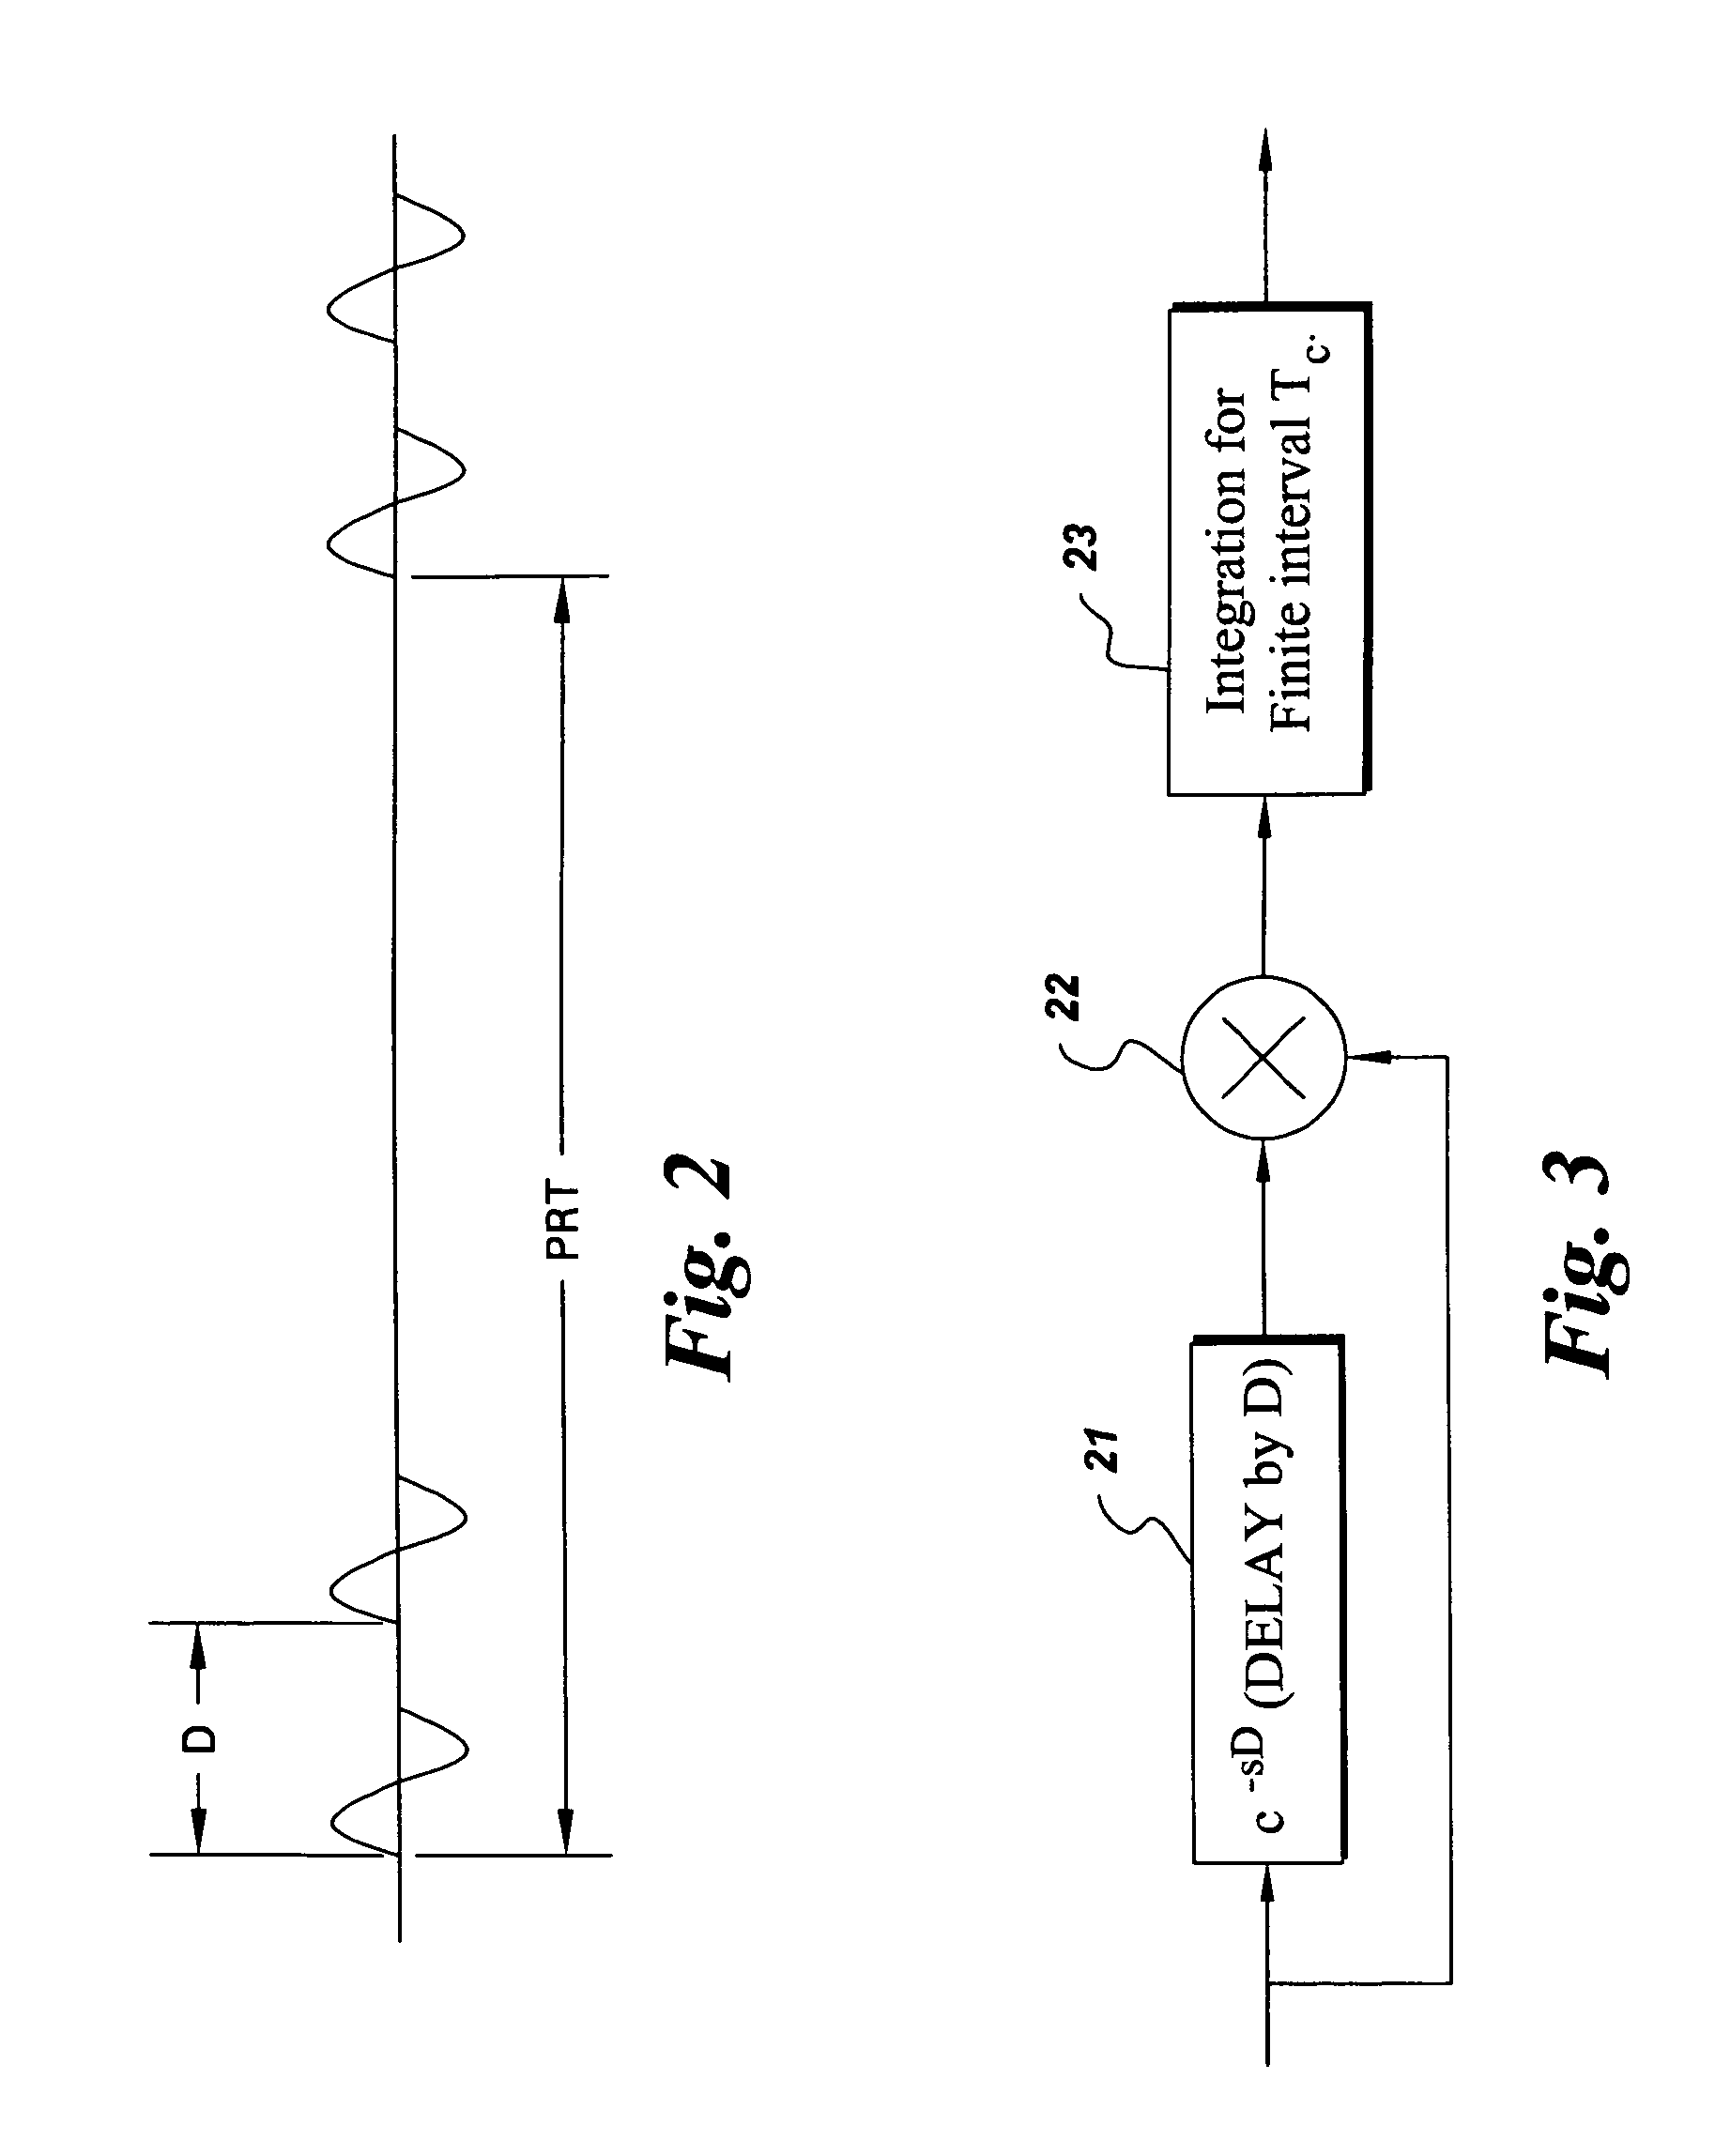 Transmitter location for ultra-wideband, transmitted-reference CDMA communication system